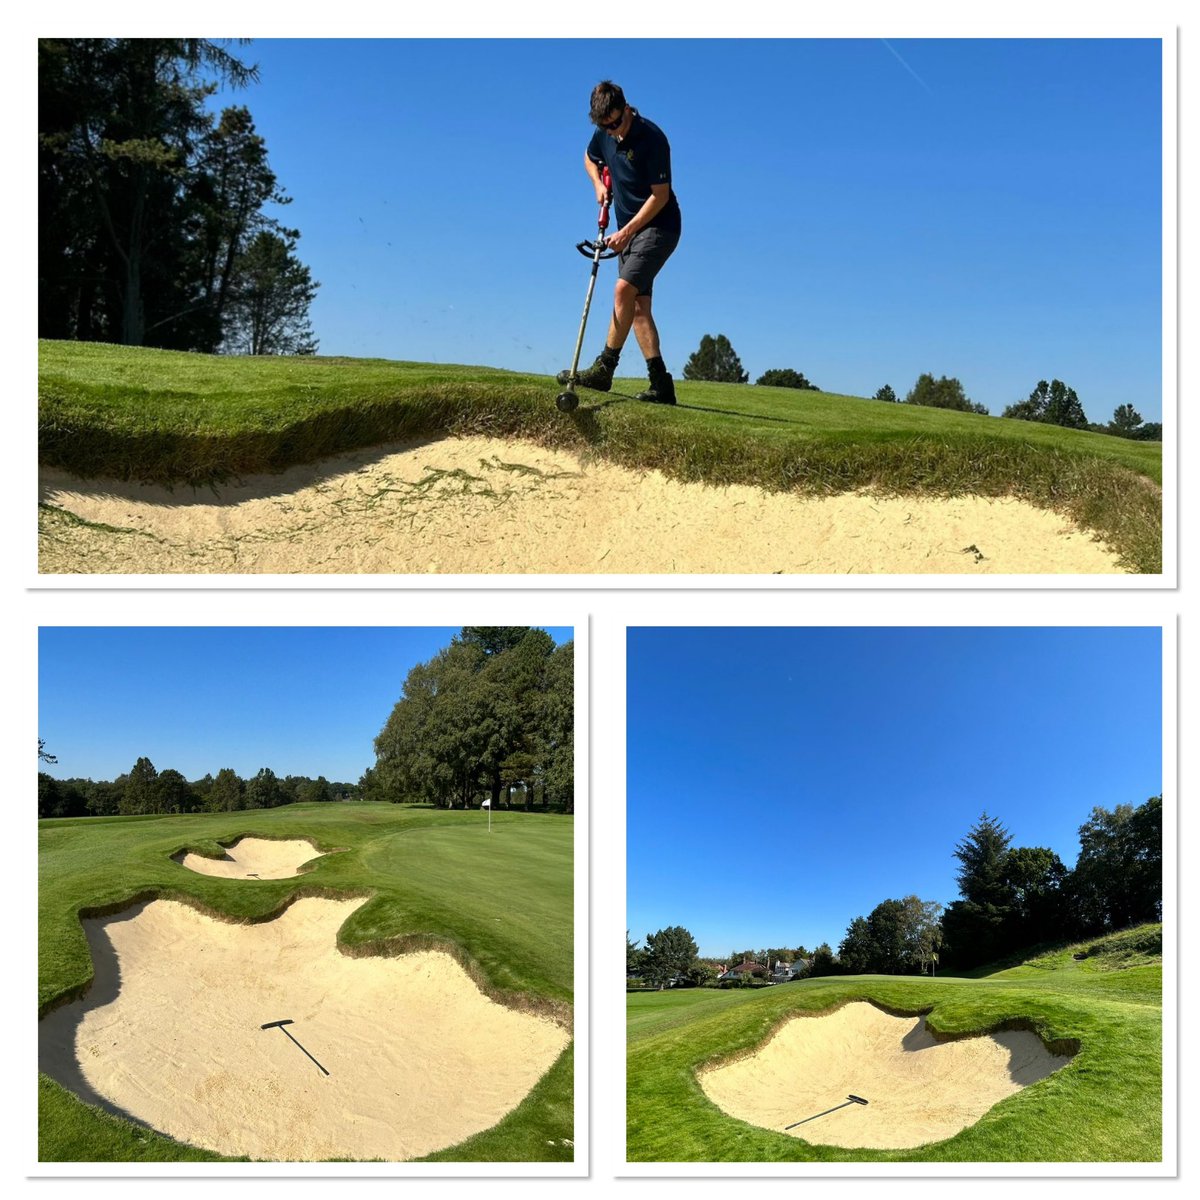 The bunkers were looking sharp in the sun after a tidy up from the team today. The course is benefiting greatly from this short heatwave! 👏🏼☀️